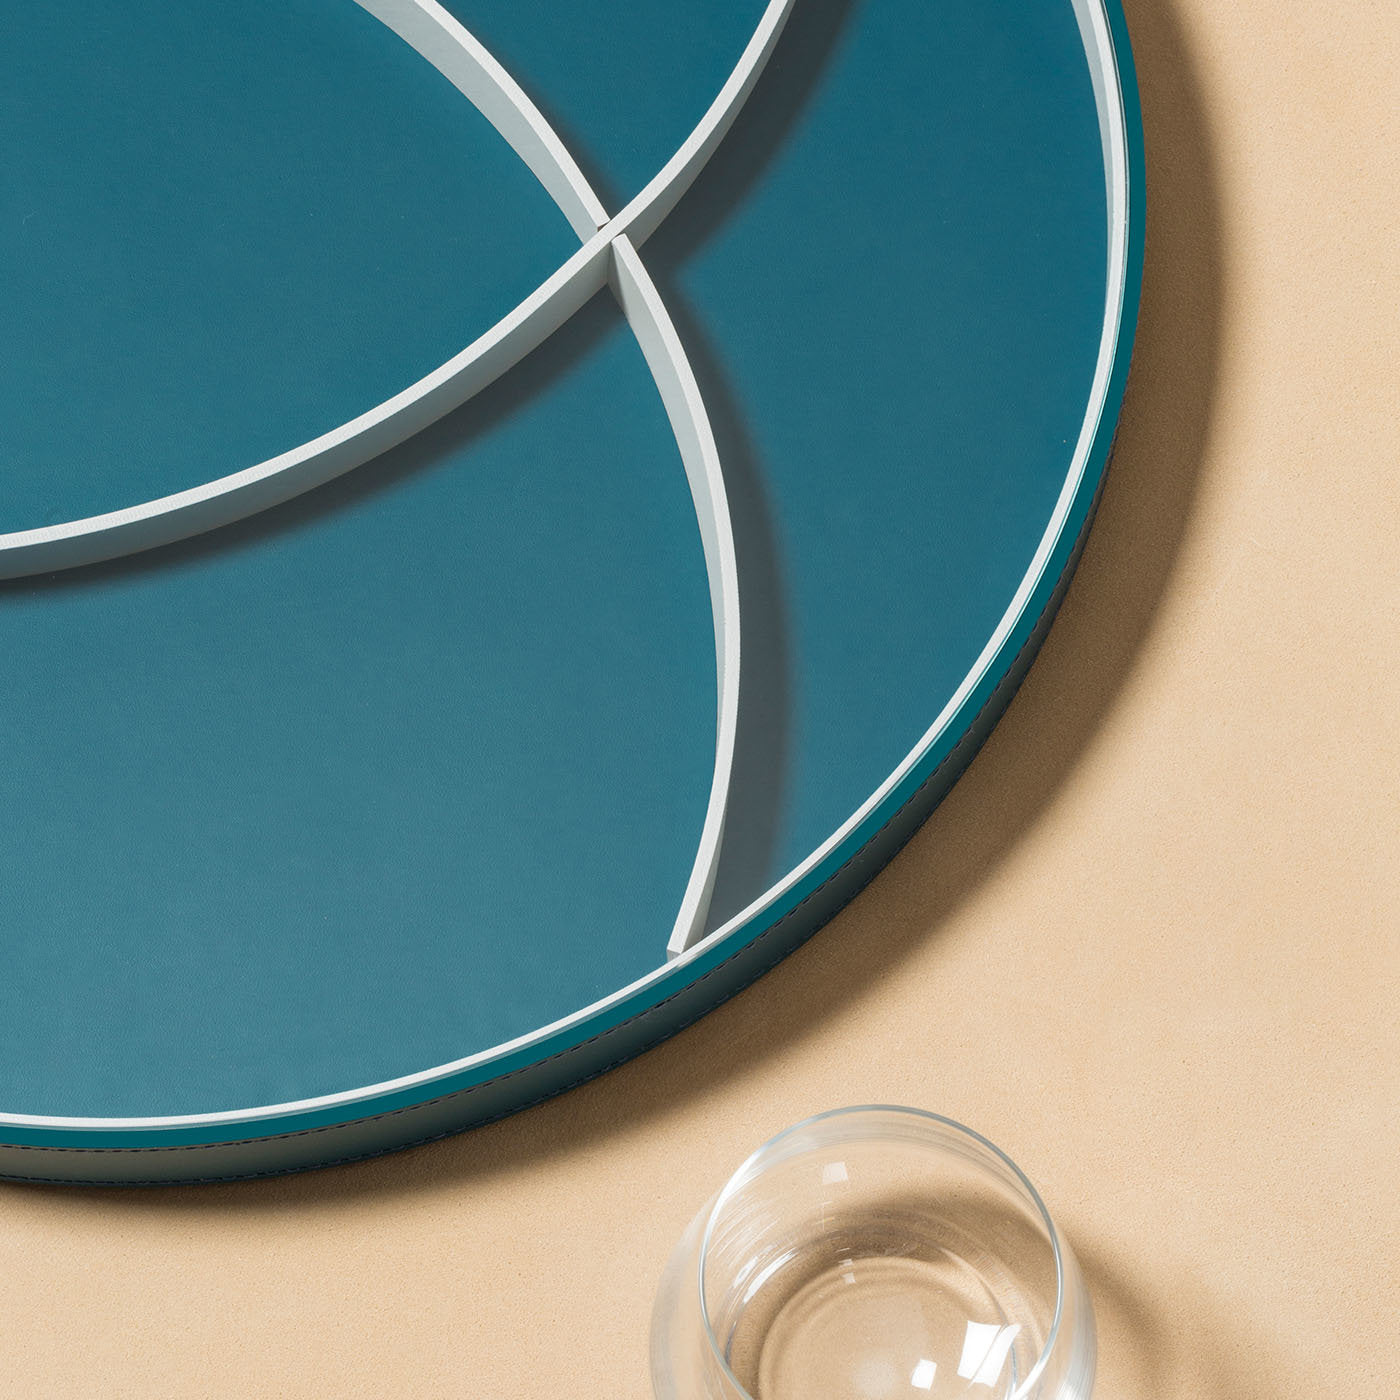 Orbit Petrol Blue Round Tray N. 2 with Dividers - Alternative view 1